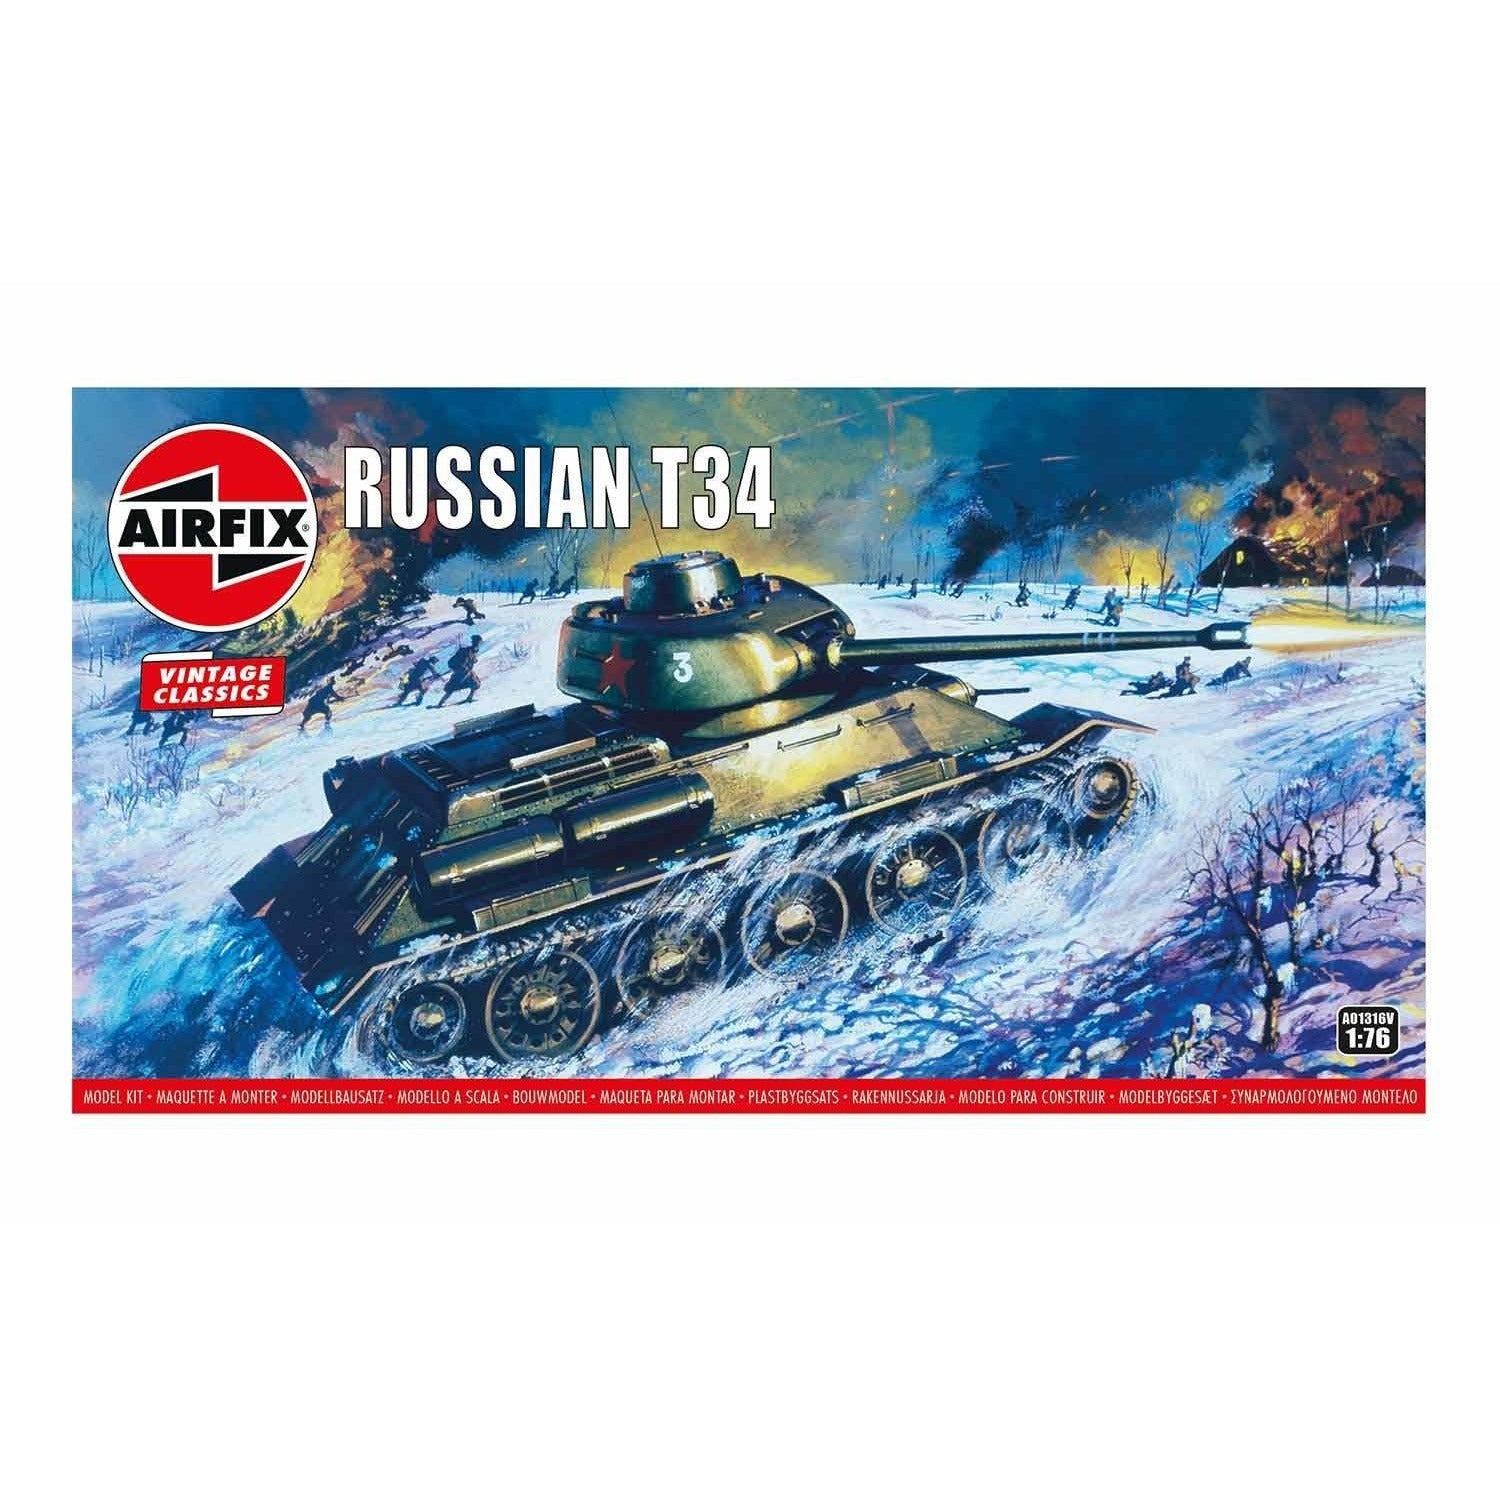 Russian T-34 1/76 by Airfix